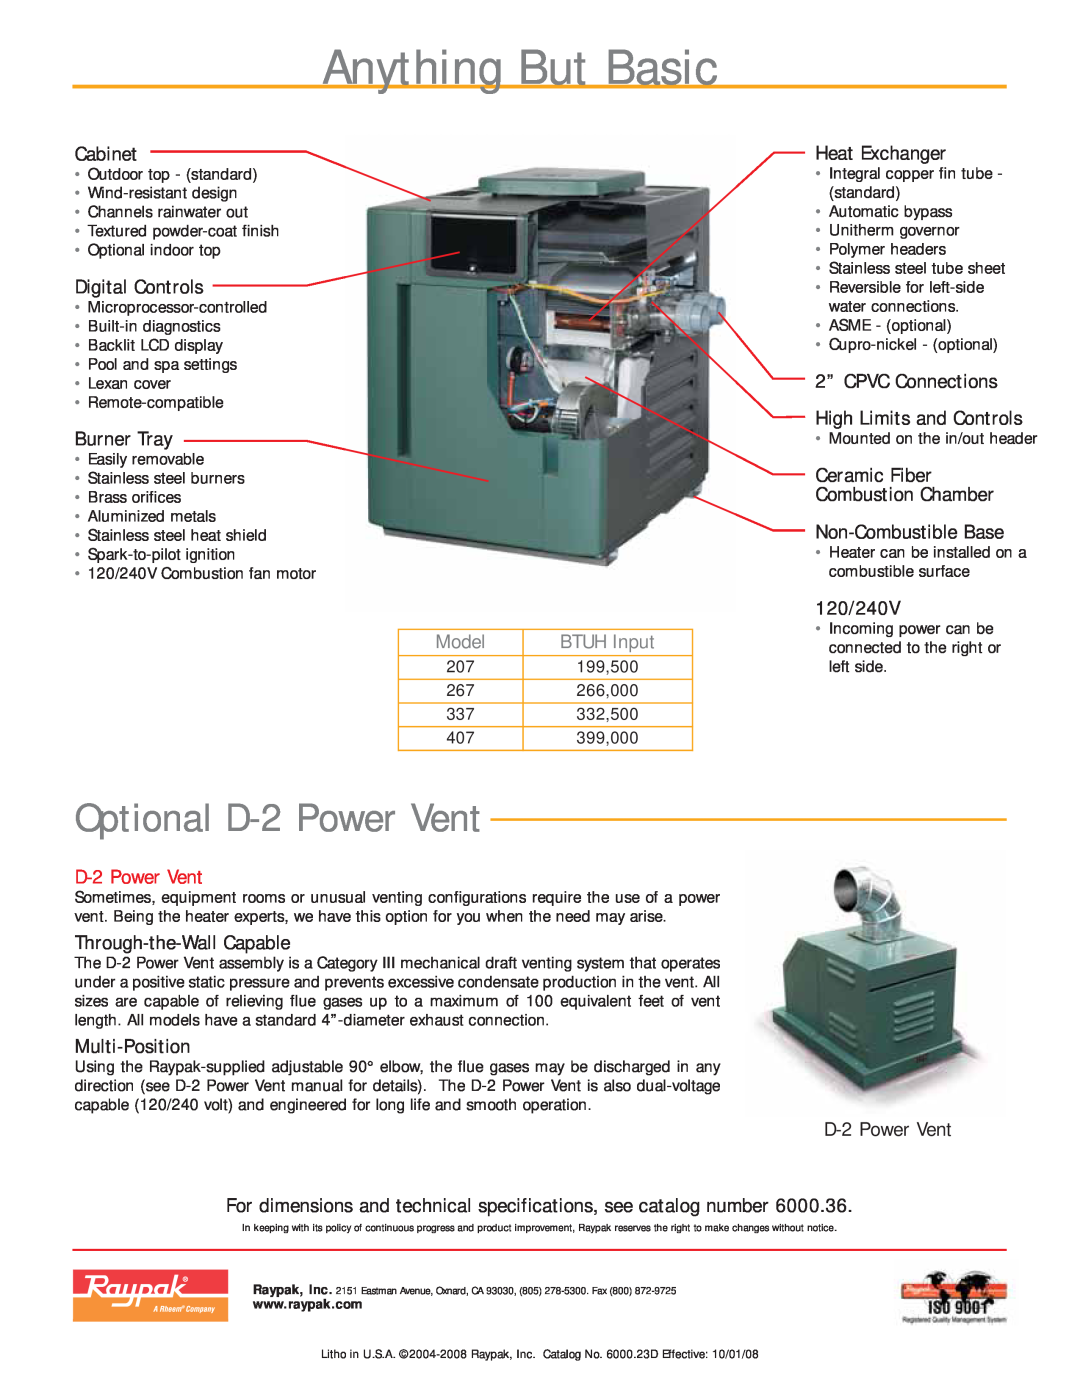 Raypak 337, 267, 207 dimensions Anything But Basic, Optional D-2Power Vent 